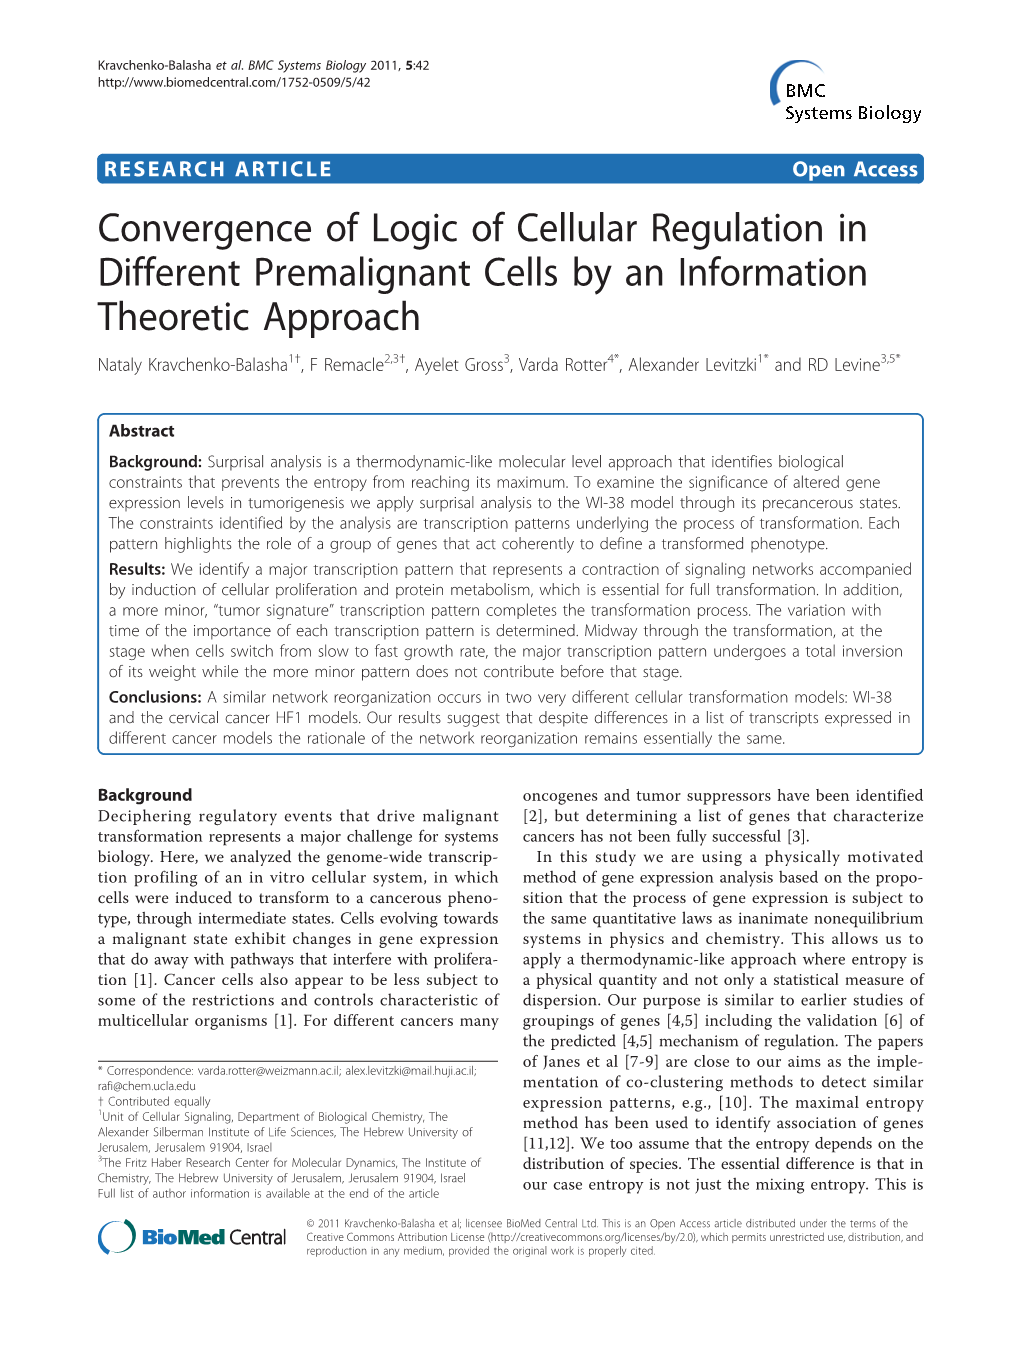 Convergence of Logic of Cellular Regulation in Different